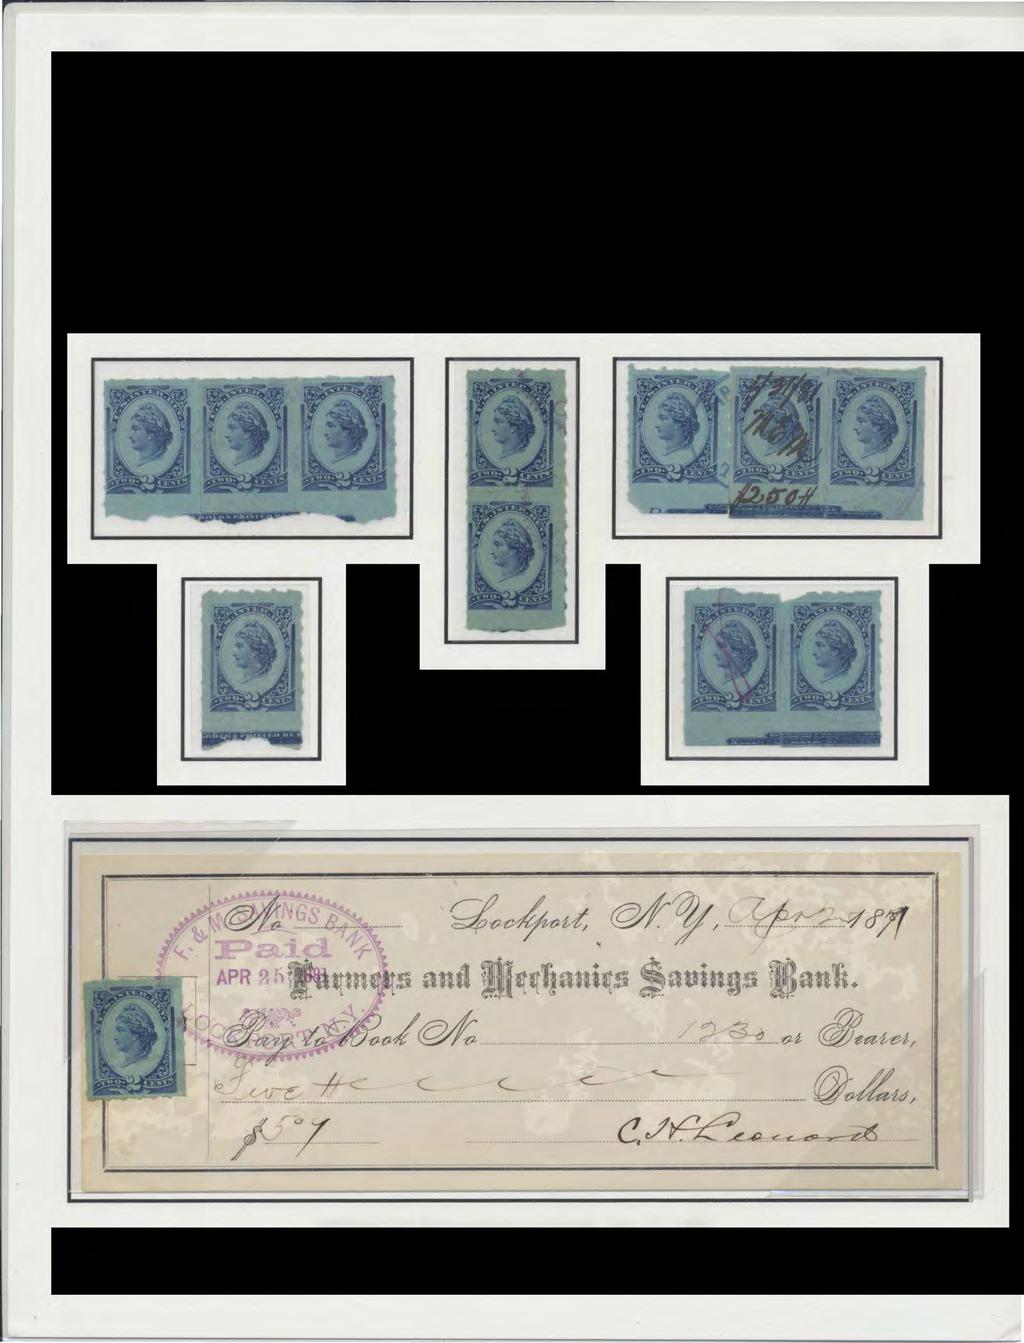 ) This documentary stamp as well as the proprietary issues were issued with rouletted separations sometime after October 16, 1880 and before February 188 1, according to Elliott